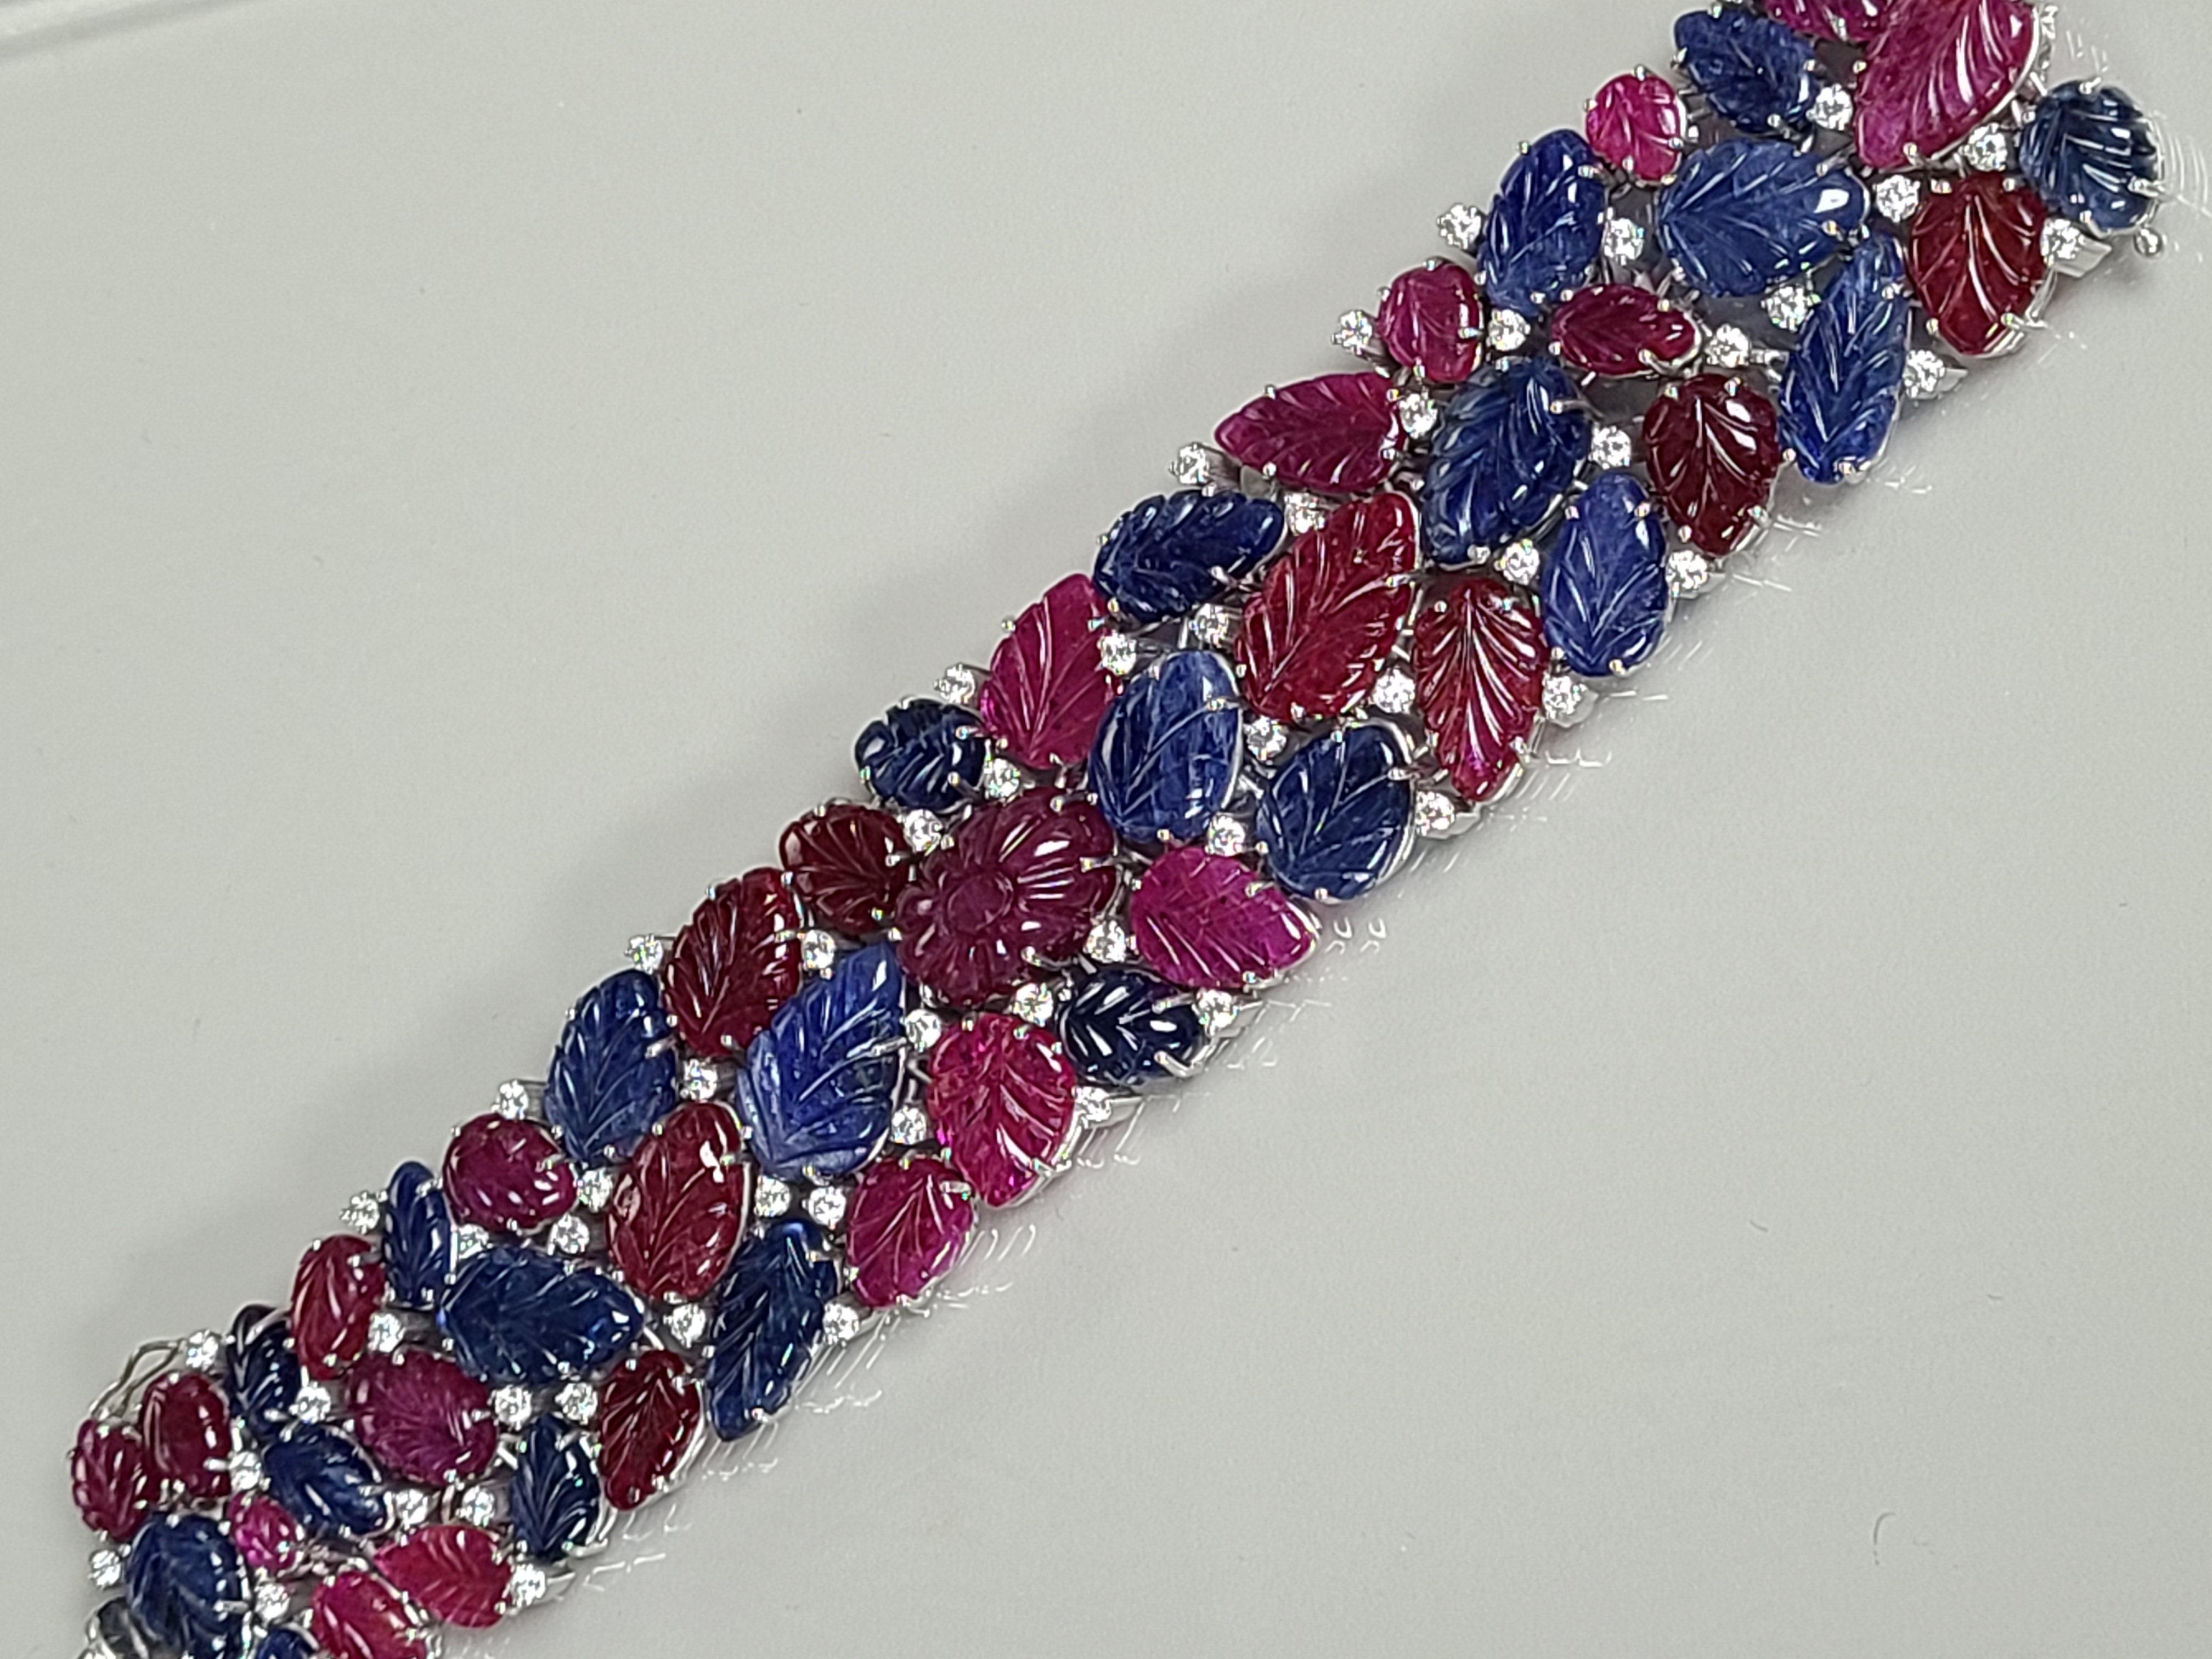 A beautiful 2 color flexible hand Made bracelet set in 18k gold with carved natural unheat ruby from Africa and Unheat blue sapphire from Burma. The combined weight of colorstone is 159.69 carats and diamond weight is 3.10 carats. The bracelet